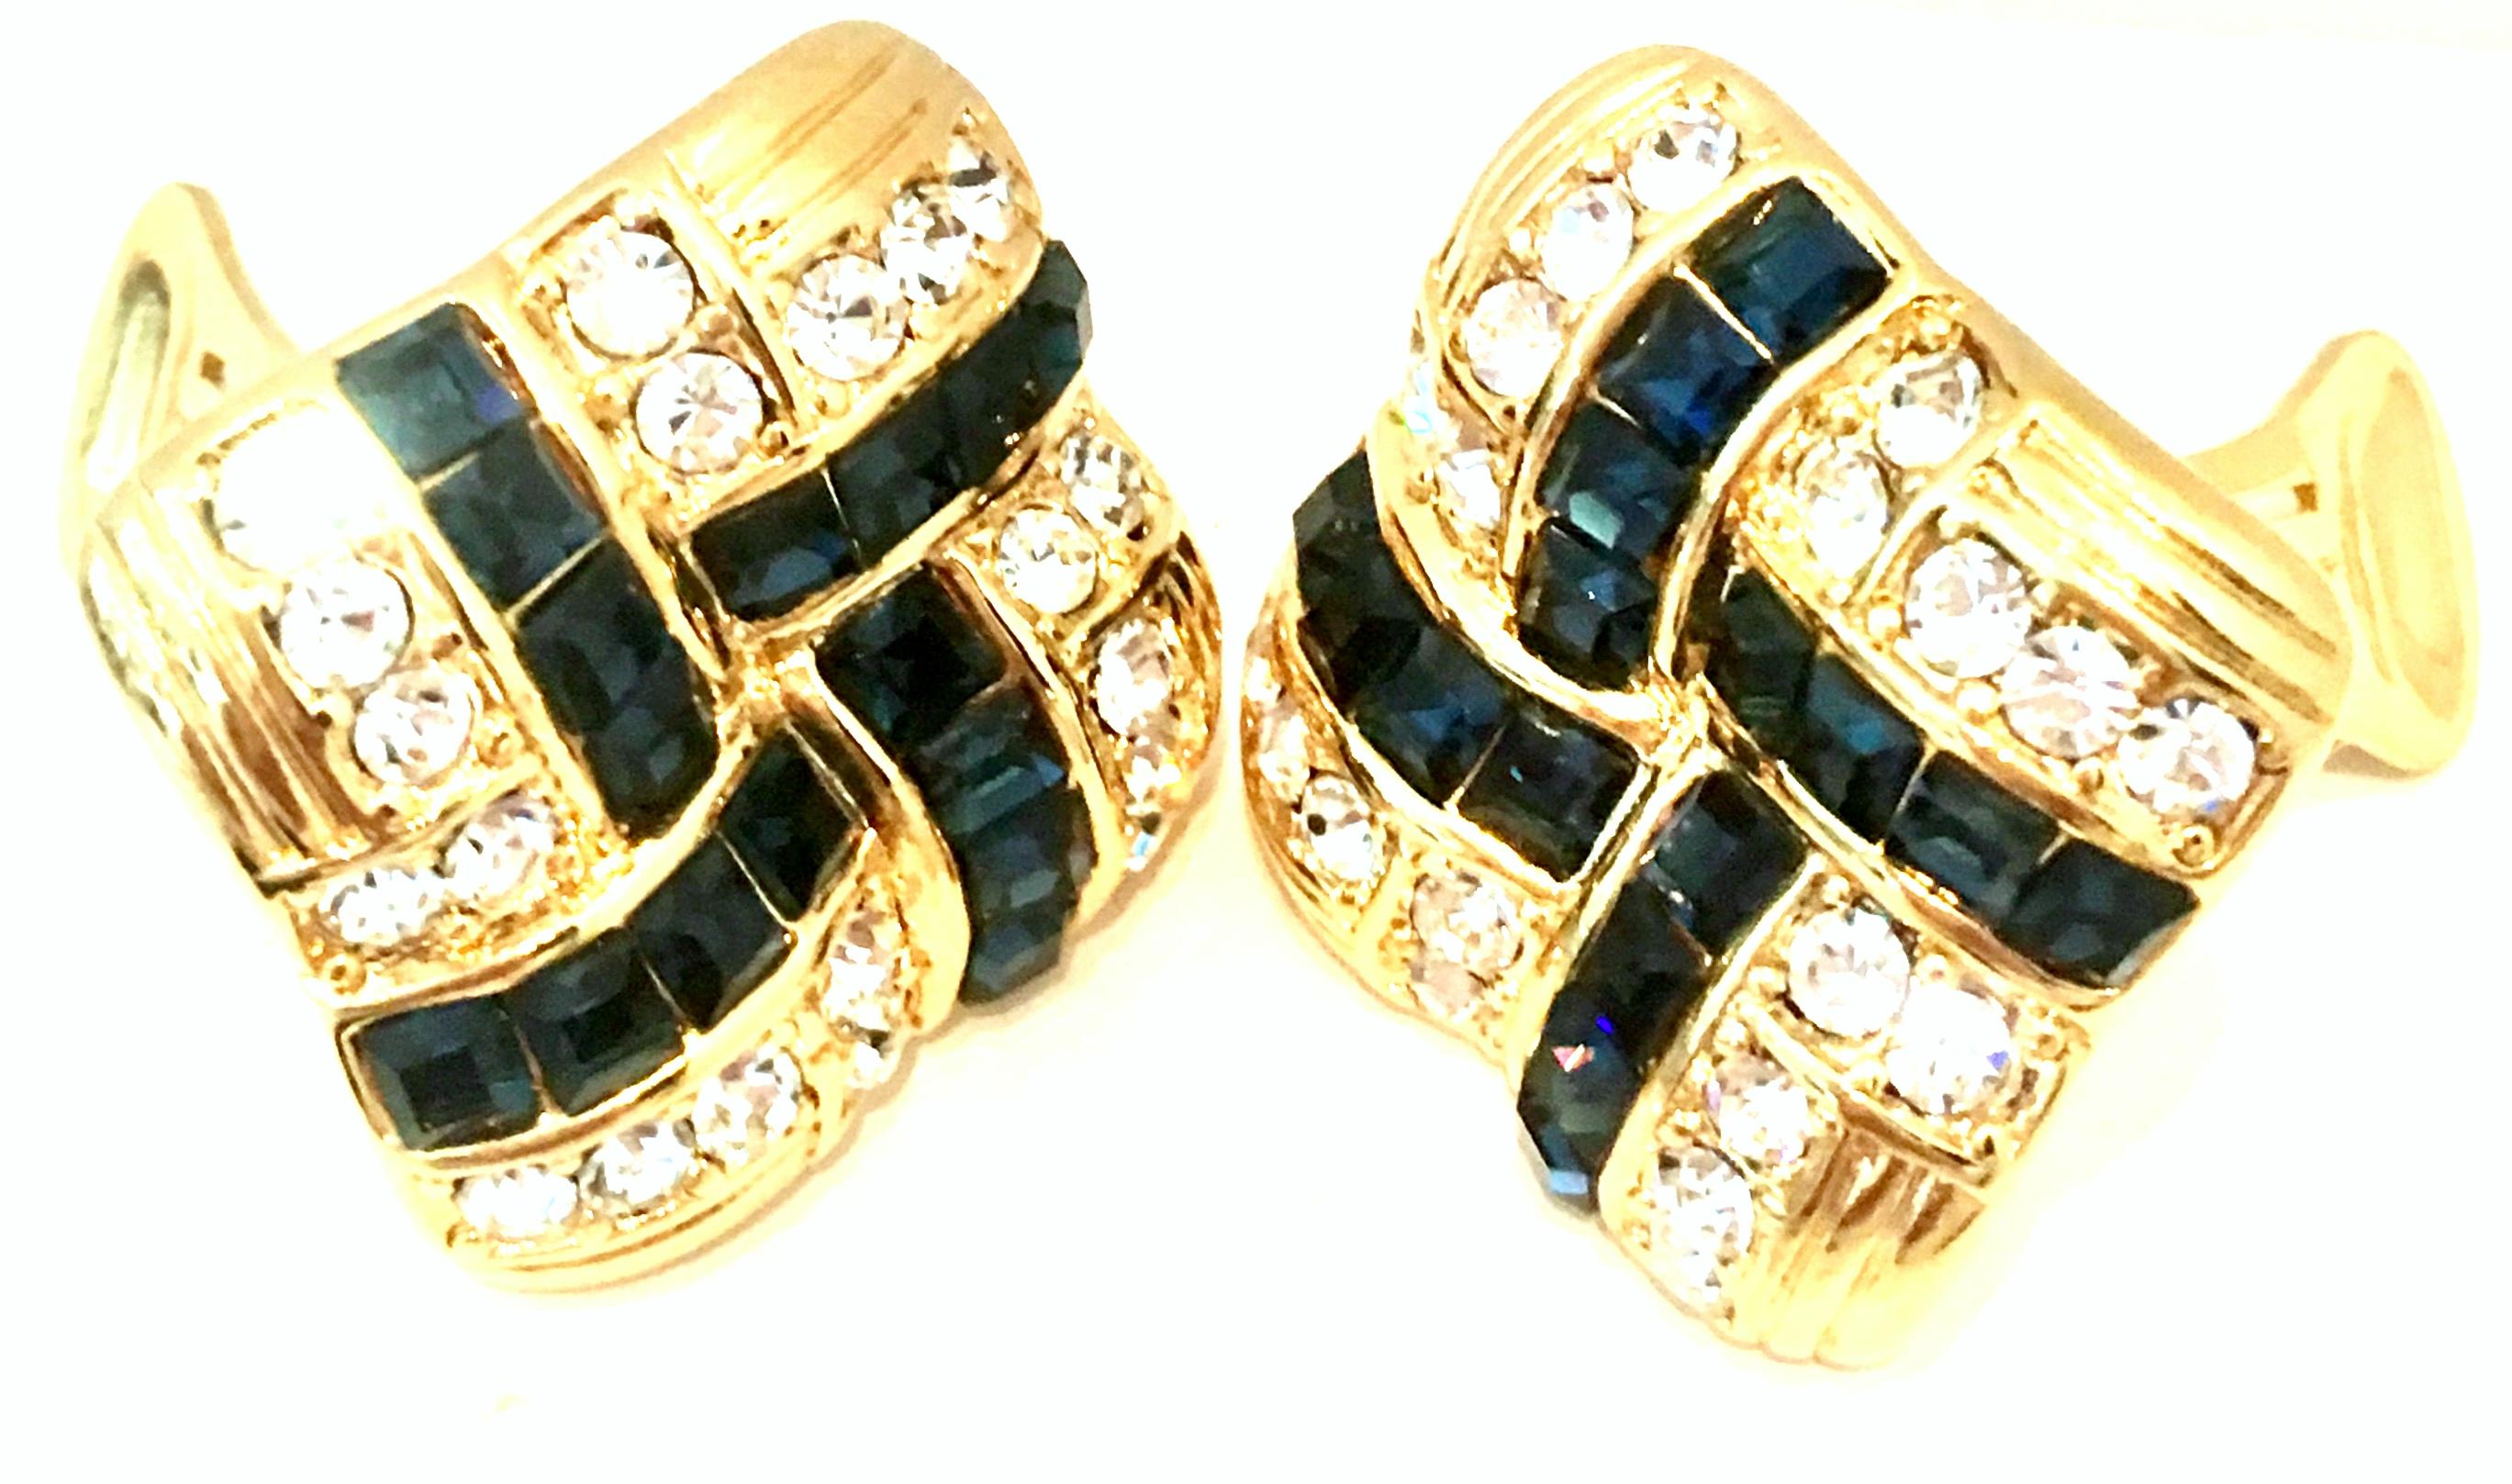 Art Deco 20th Century Pair Of Gold Plate & Swarovski Crystal Earrings By, Nolan Miller For Sale